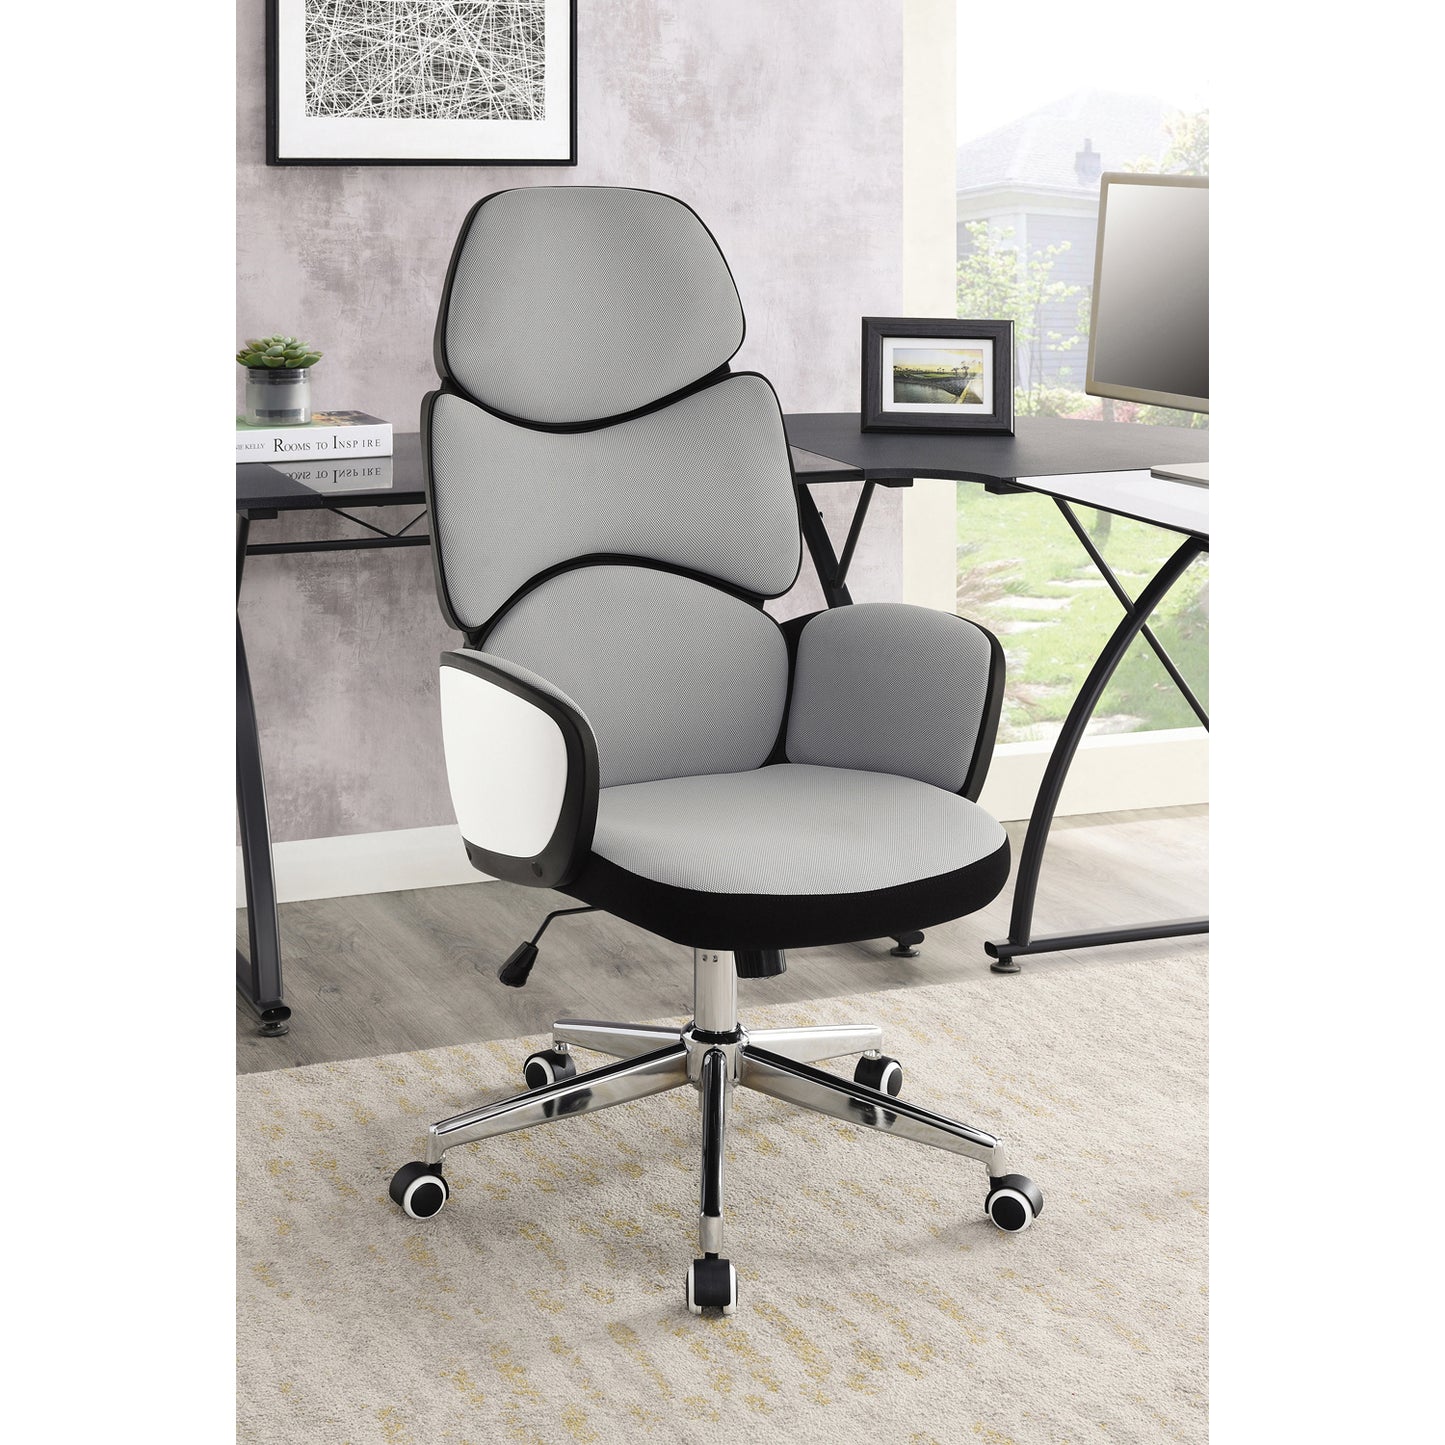 Upholstered Office Chair Light with Casters Grey and Chrome